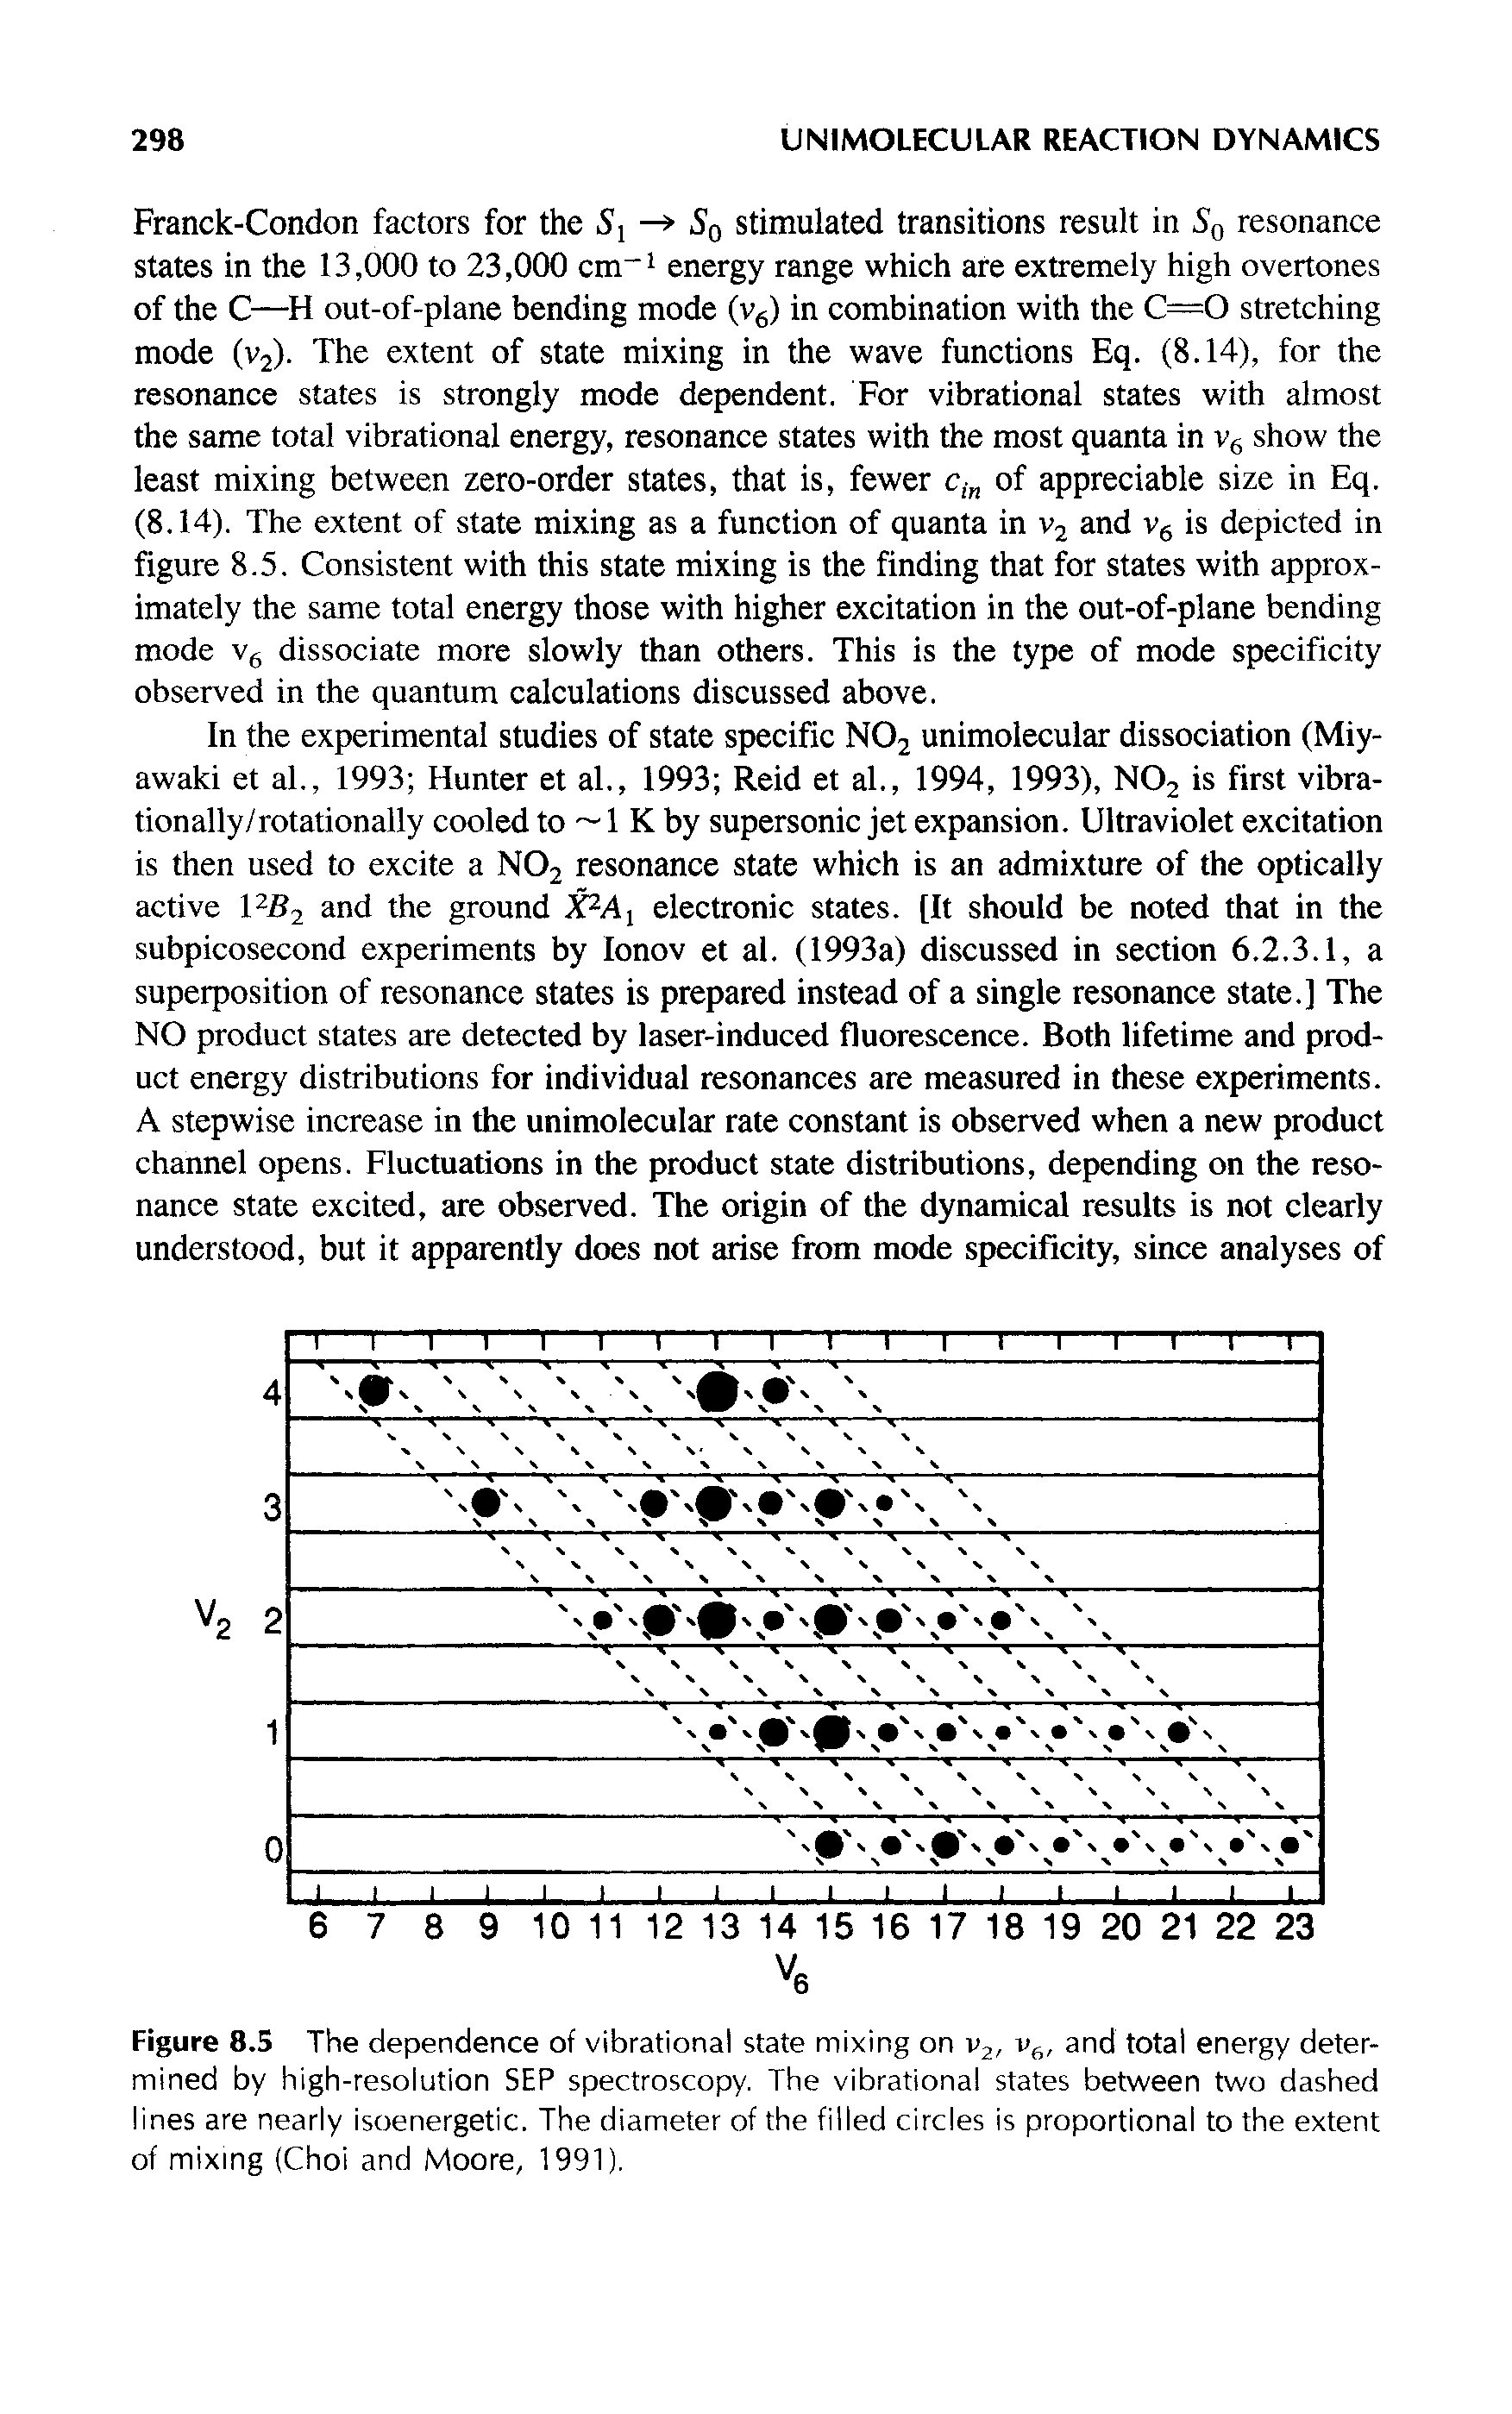 Figure 8.5 The dependence of vibrational state mixing on V2, and total energy determined by high-resolution SEP spectroscopy. The vibrational states between two dashed lines are nearly isoenergetic. The diameter of the filled circles is proportional to the extent of mixing (Choi and Moore, 1991),...